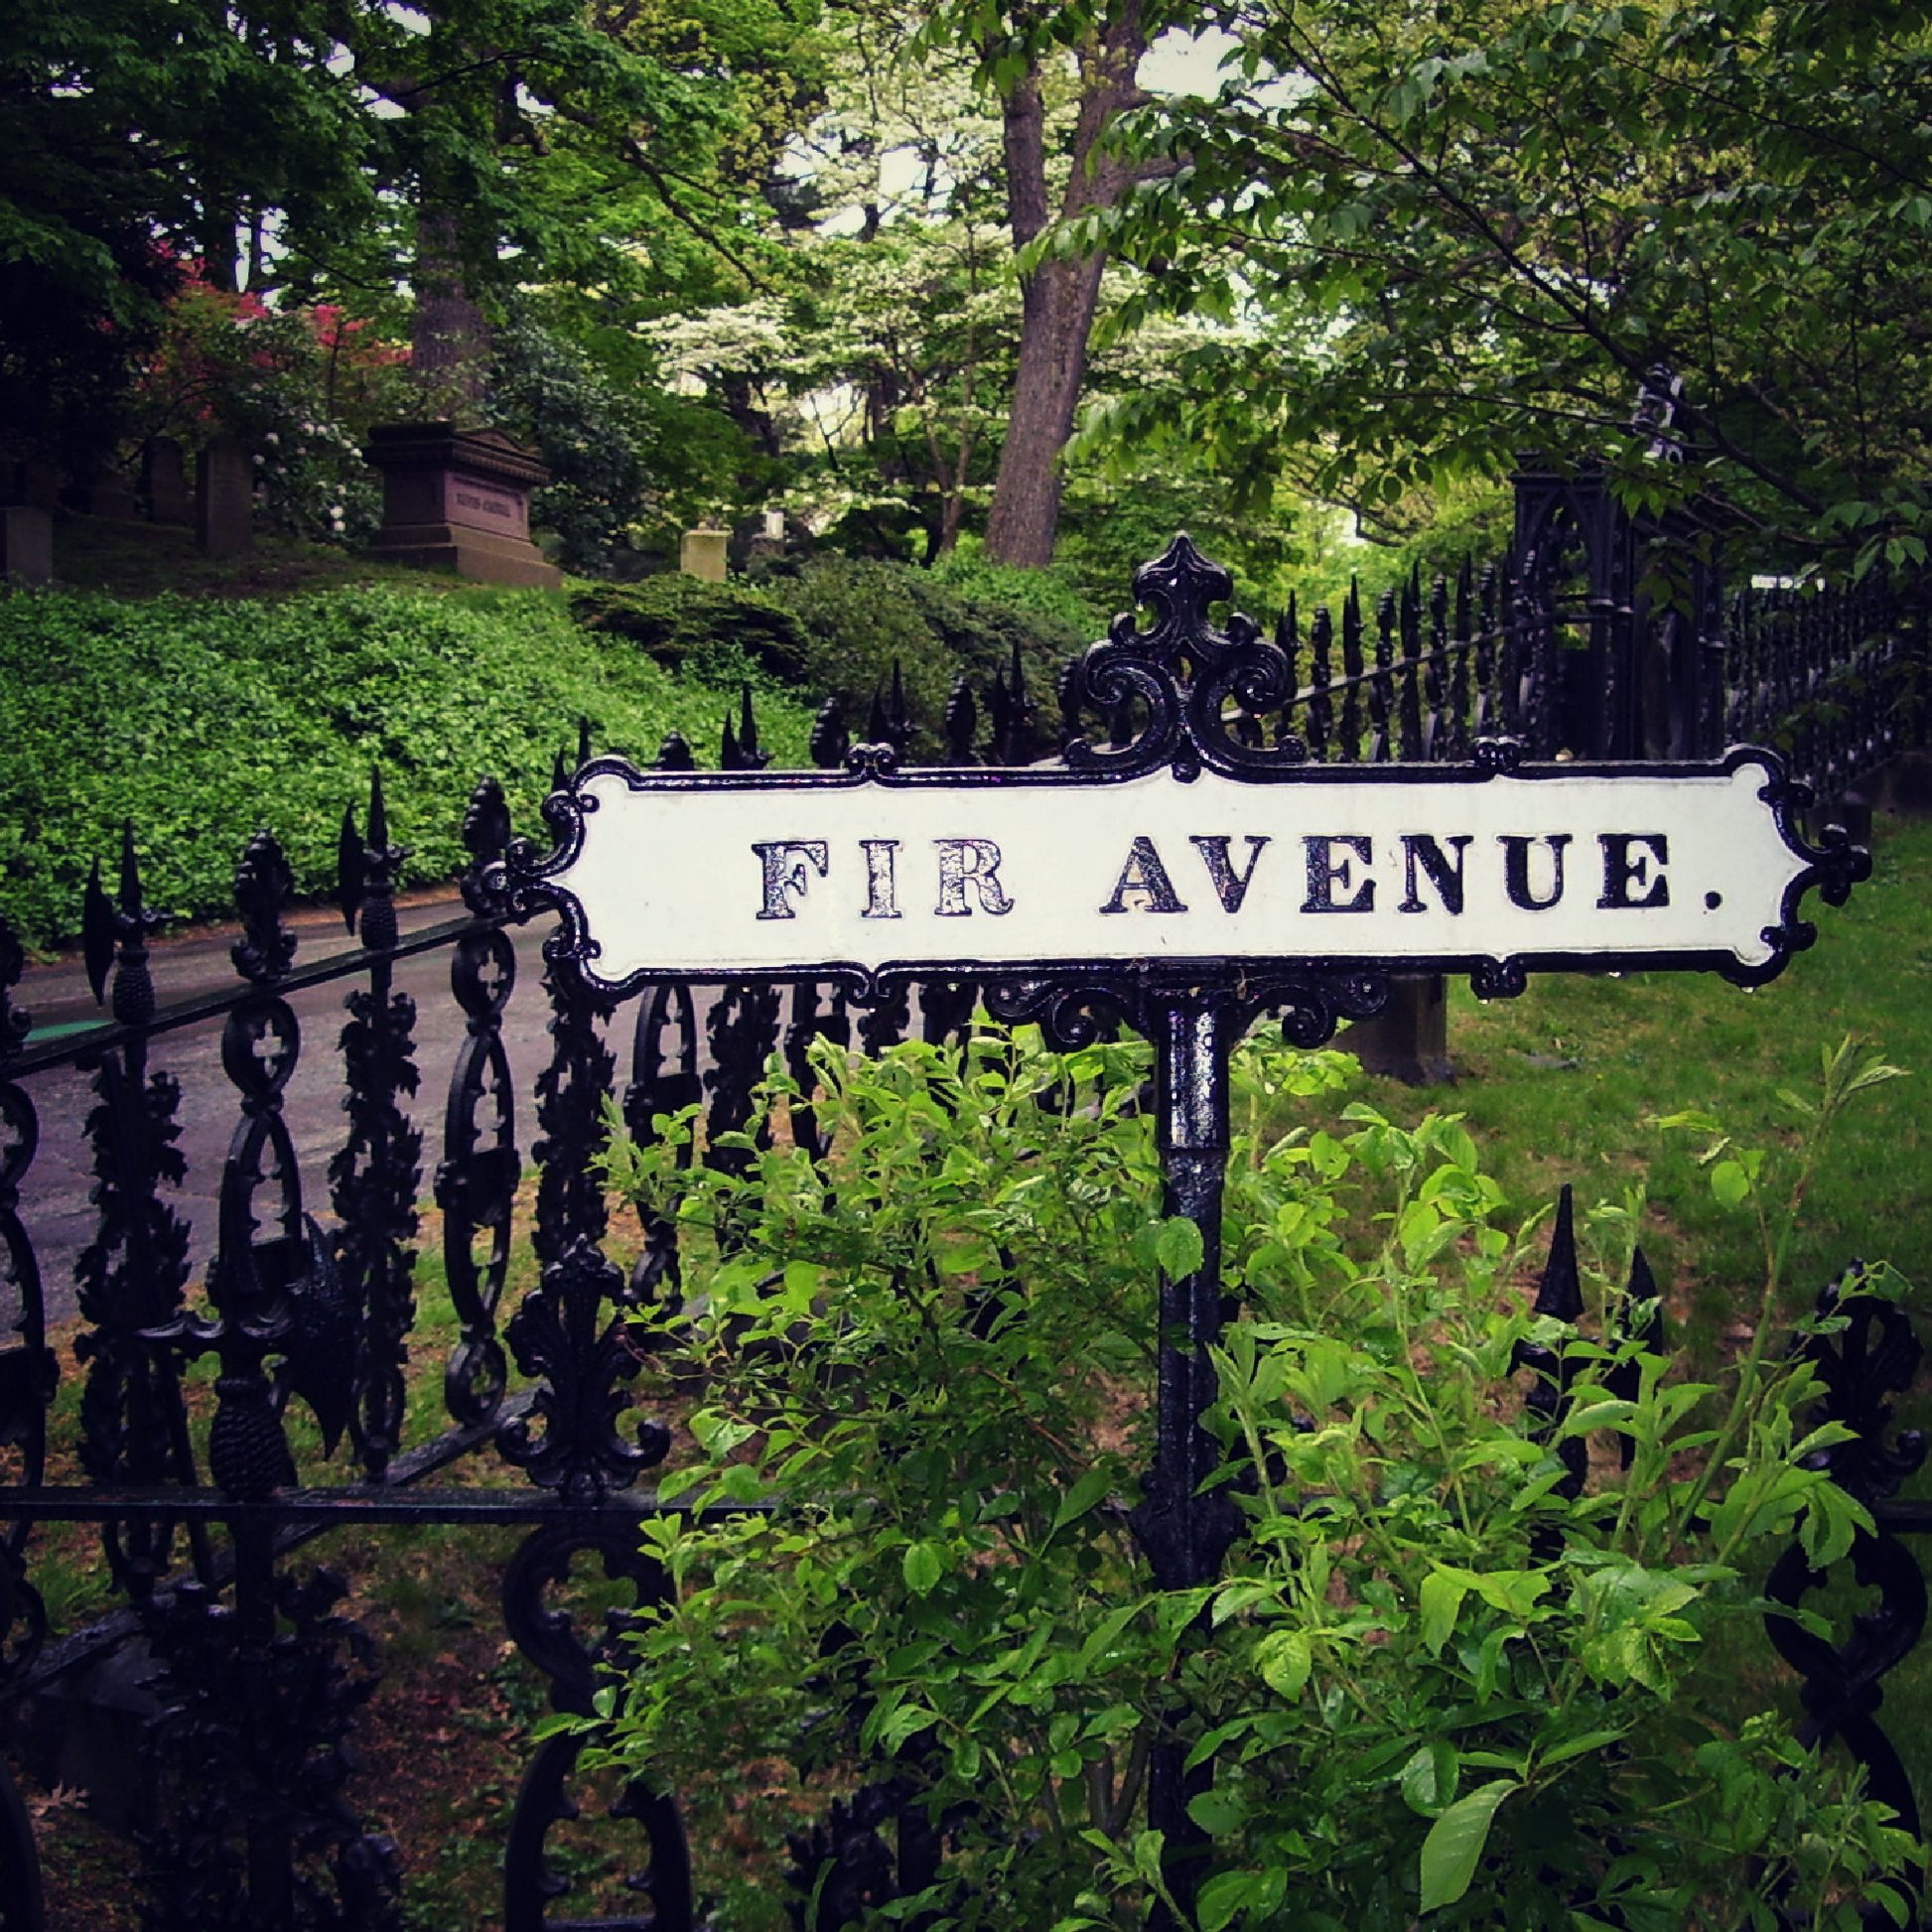 A sign in Mount Auburn cemetery reading "Fir Avenue," surrounded by lush greenery and a wrought iron fence.